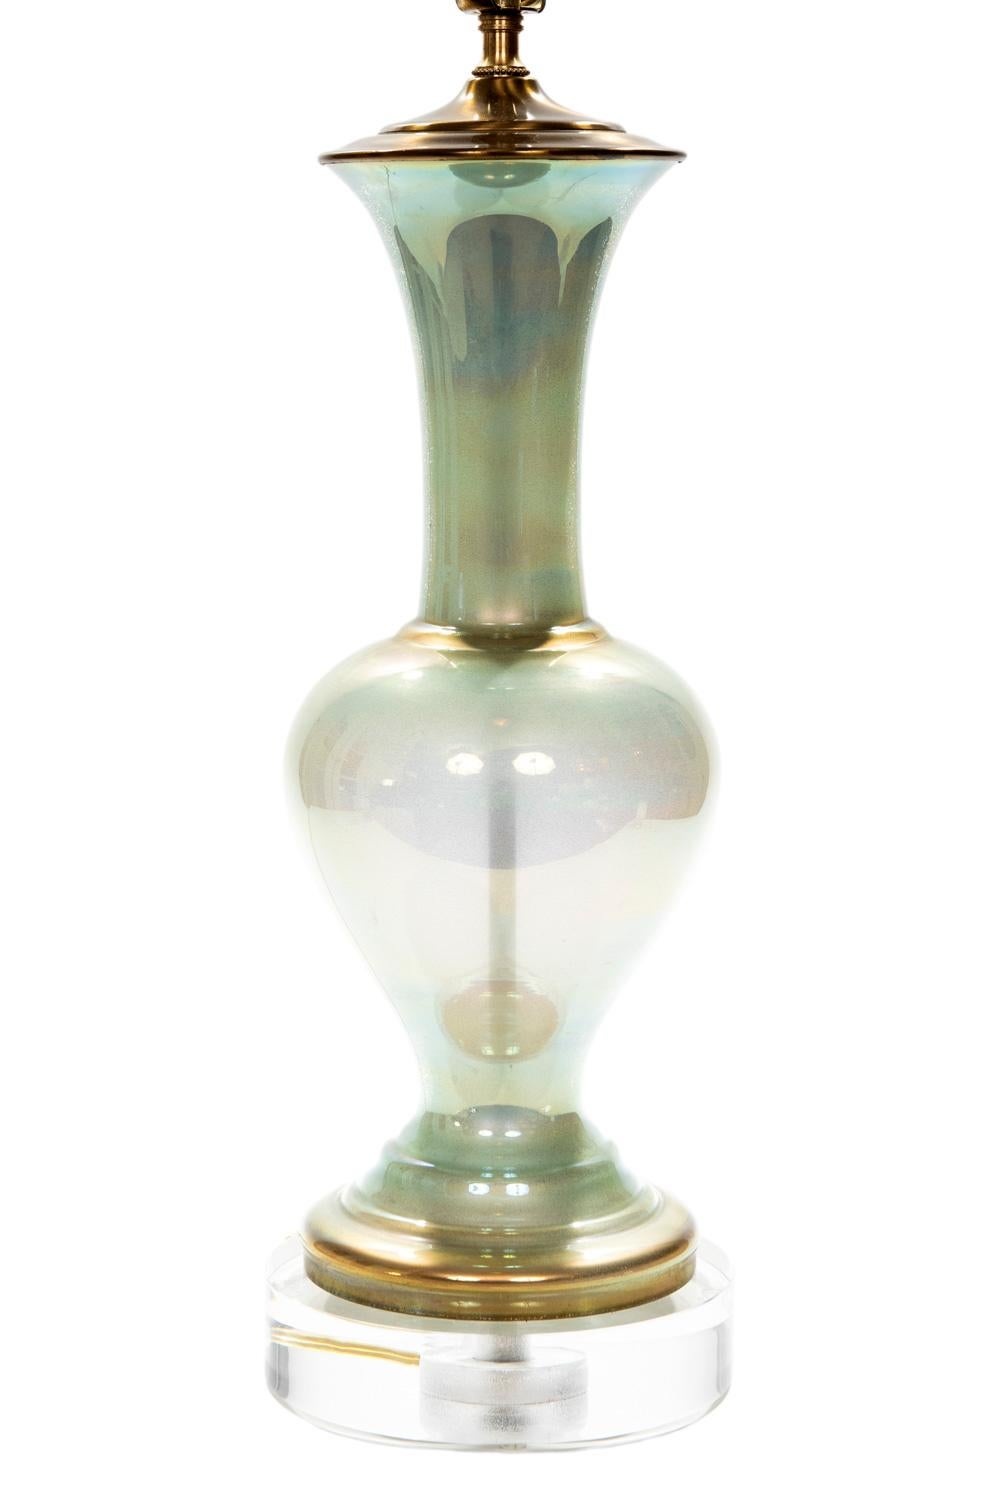 These beautiful shimmering iridescent urn shaped celadon table lamps are mounted on their original brass bases. The beauty of
the lamps is the way they reflect light and the multi dimension of color they exhibit. The 